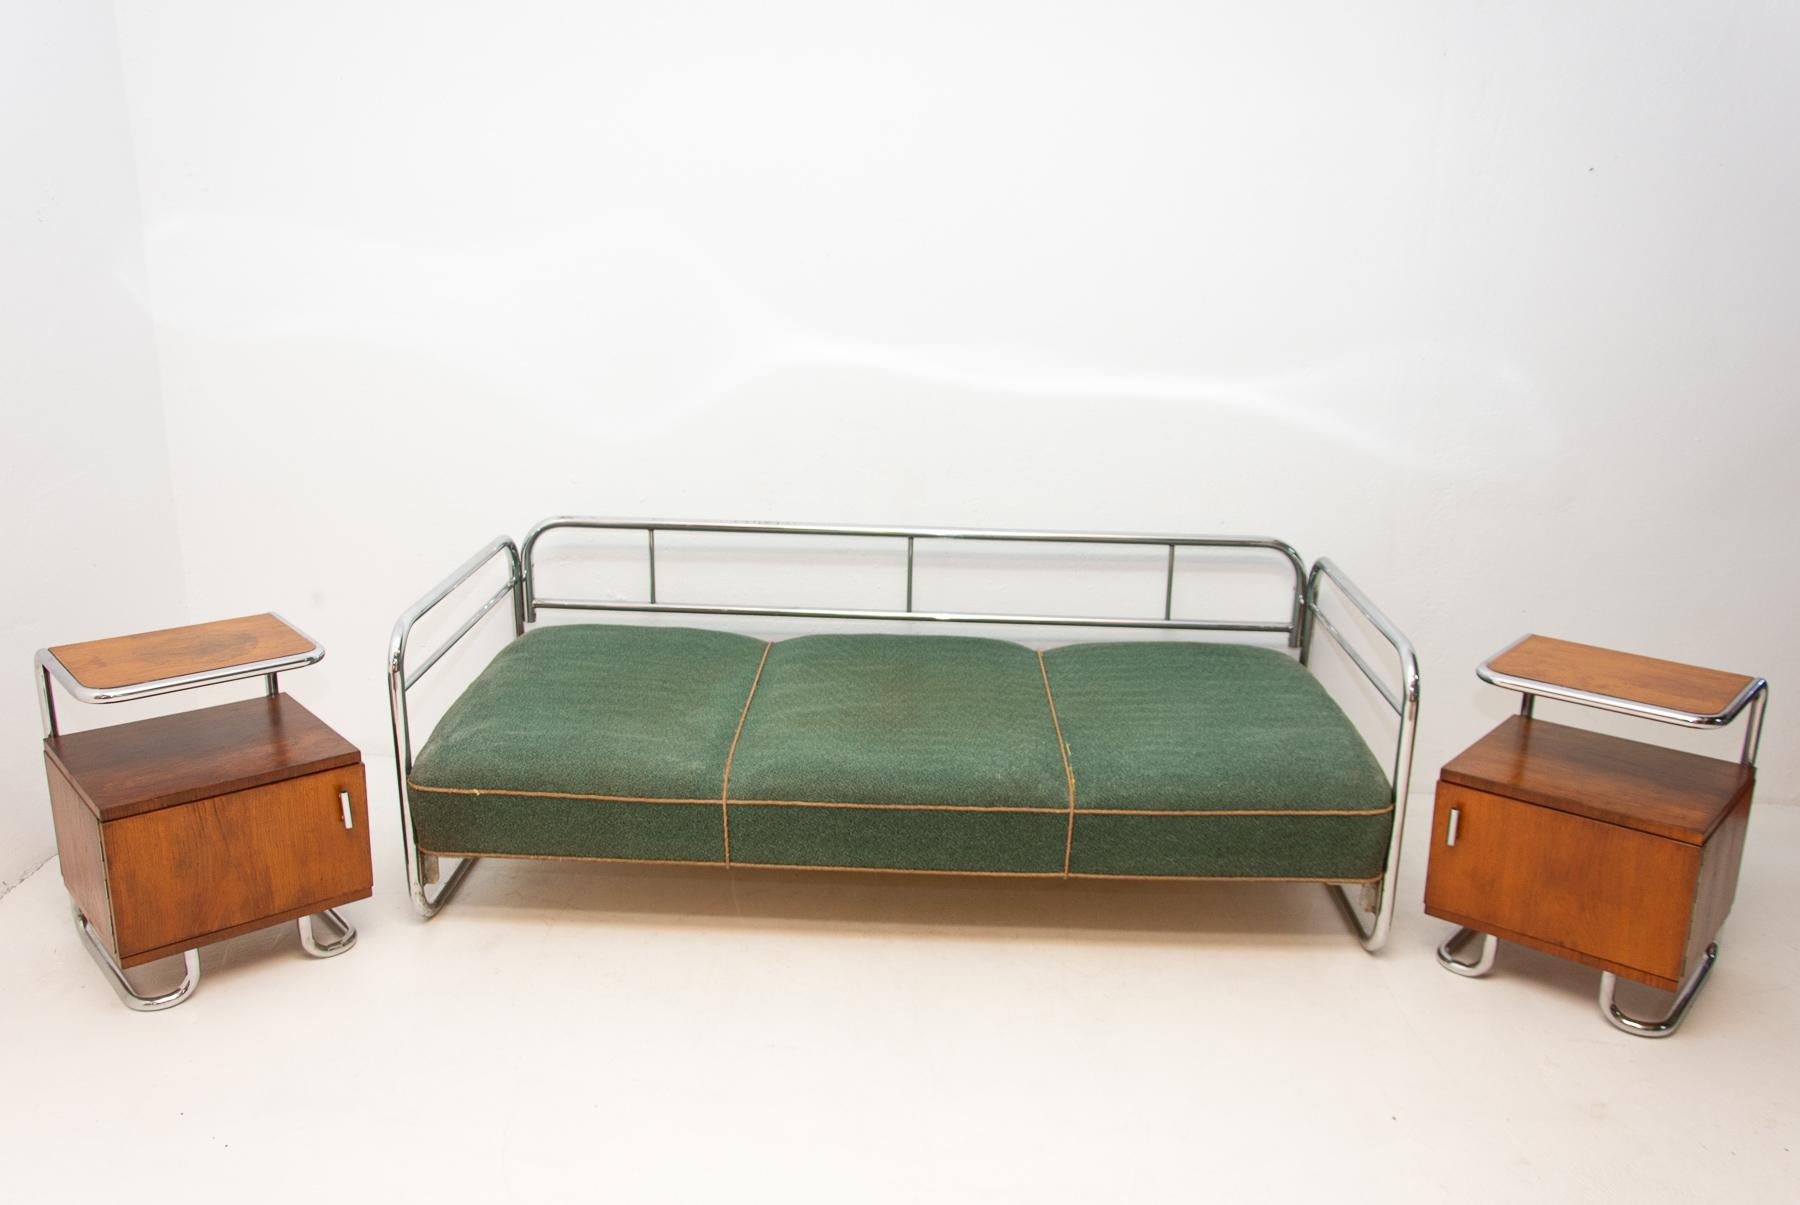 Chromed tubular steel sofa from the Bauhaus period, 1930s, Bohemia. Probably made by Hynek Gottwald company. Chrome and upholstery are in good Vintage condition, bearing signs of age and using.

Measures: Height 65 cm

Length 193 cm

Depth 89